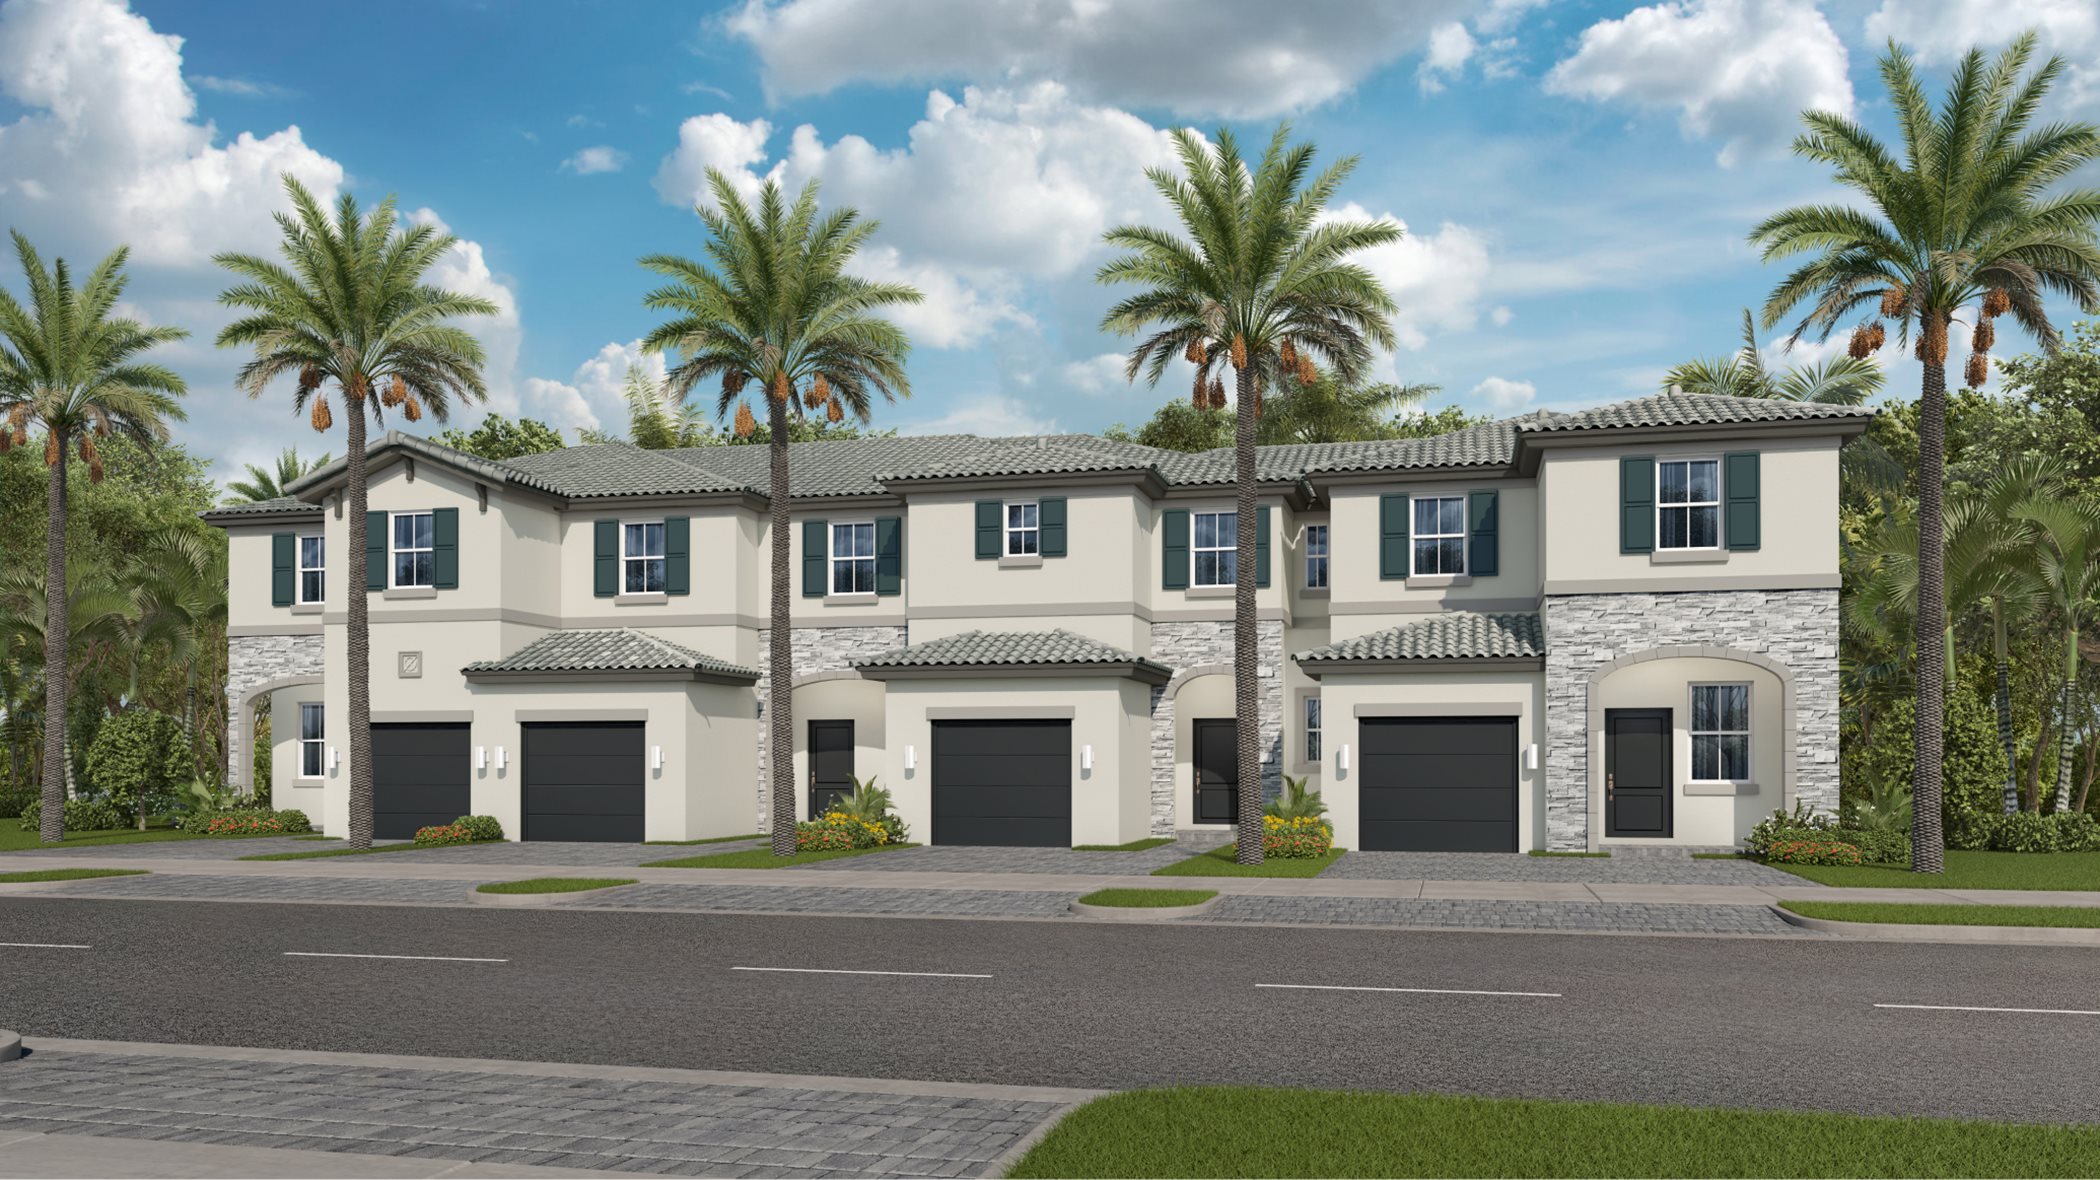 Sunset Trails townhomes